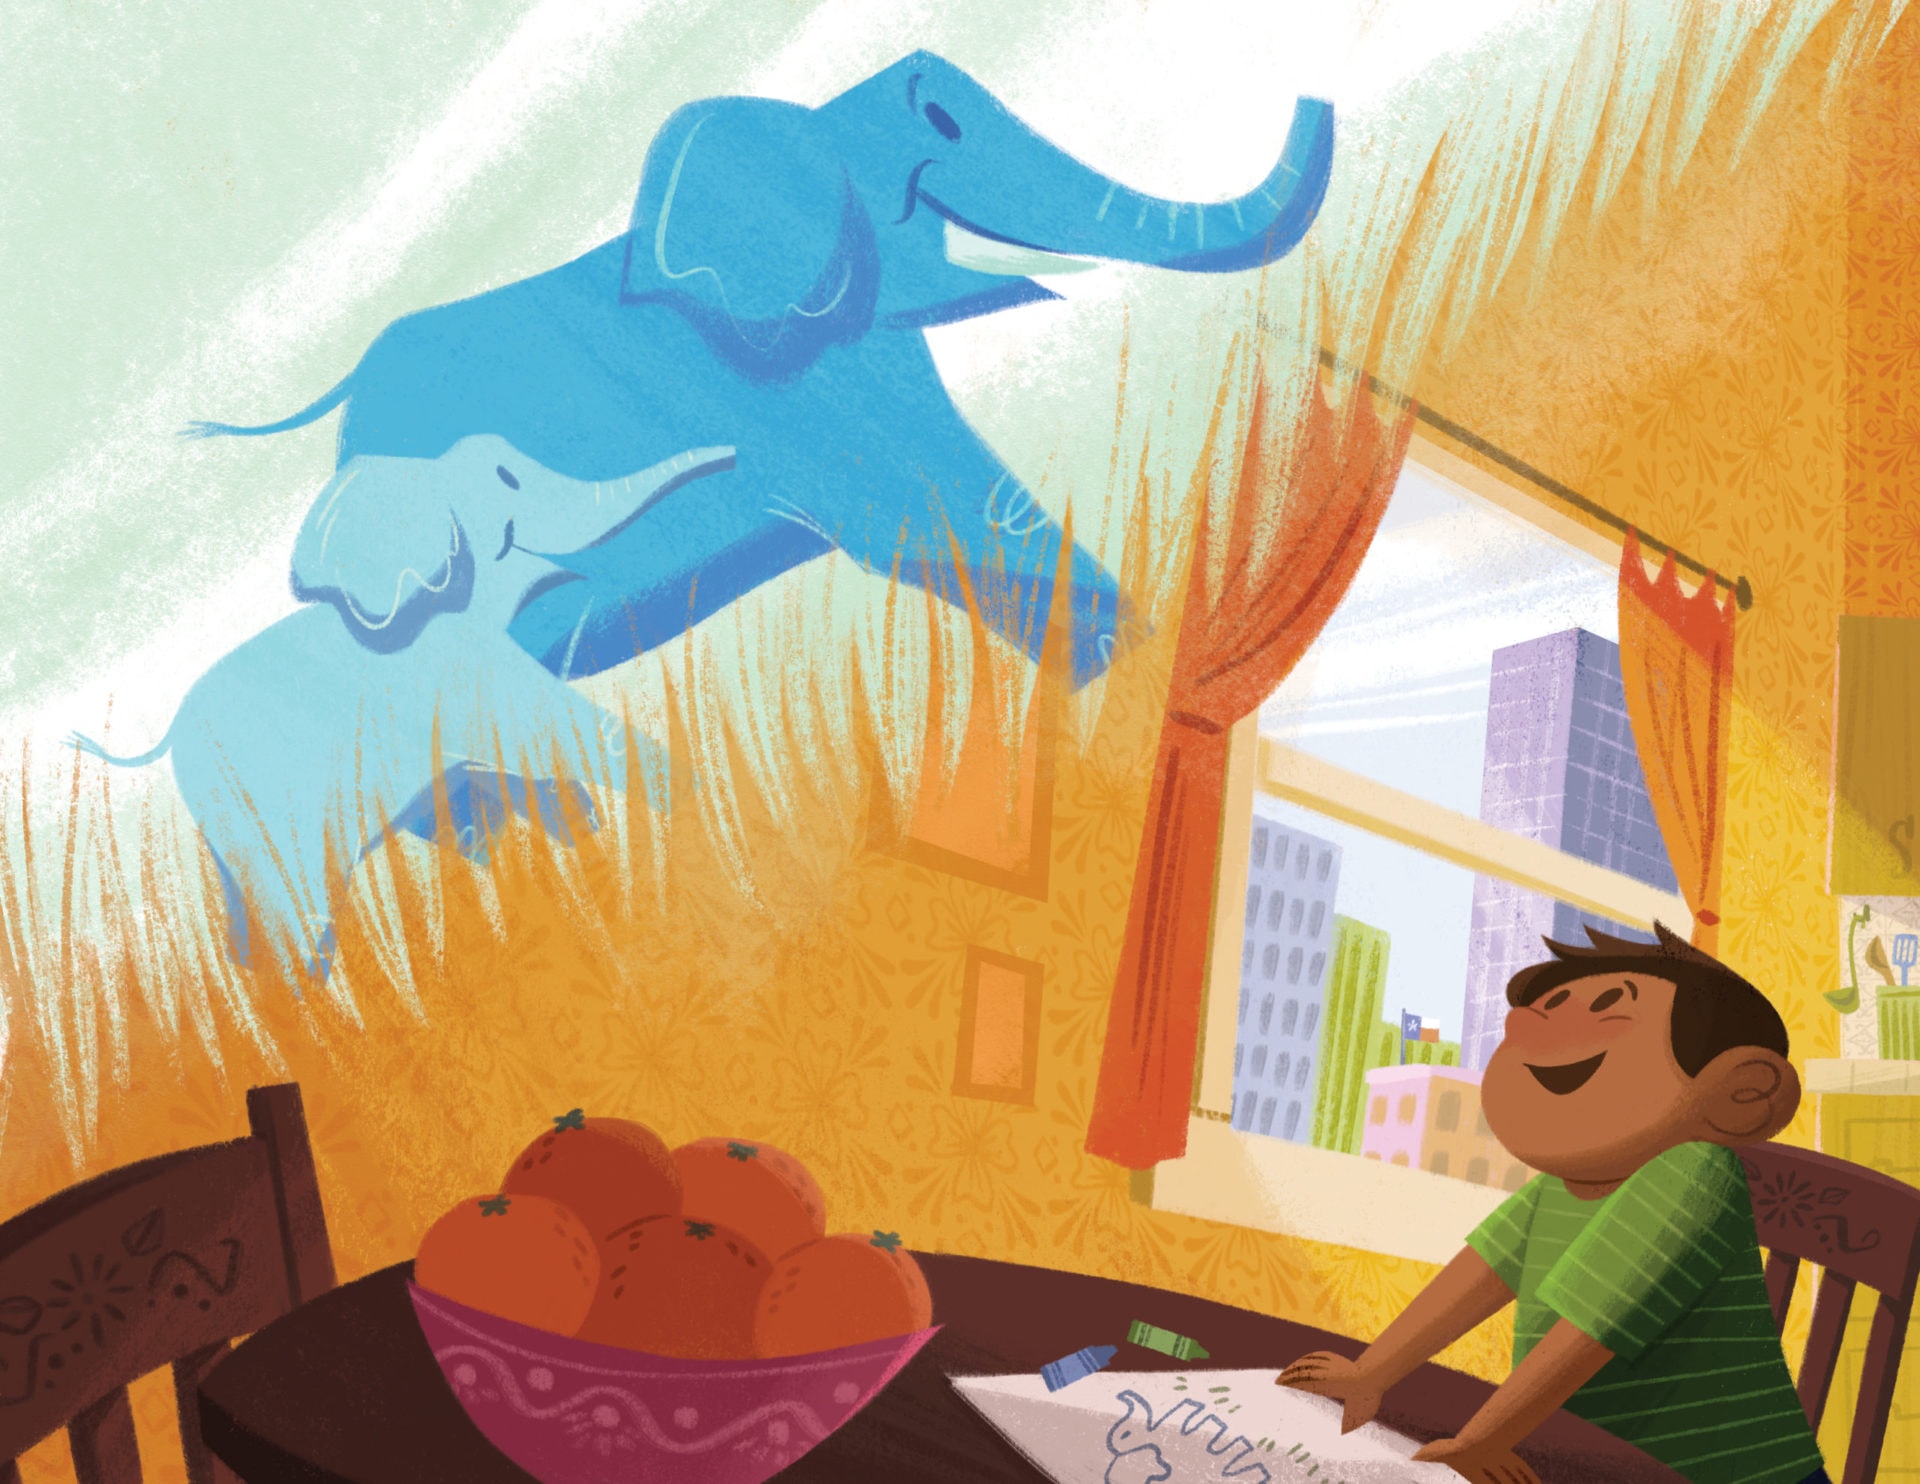 Illustration of a boy doing homework at a table, looking surprised at a large elephant floating above him inside a room with vibrant wallpaper and a view of a cityscape outside the window.